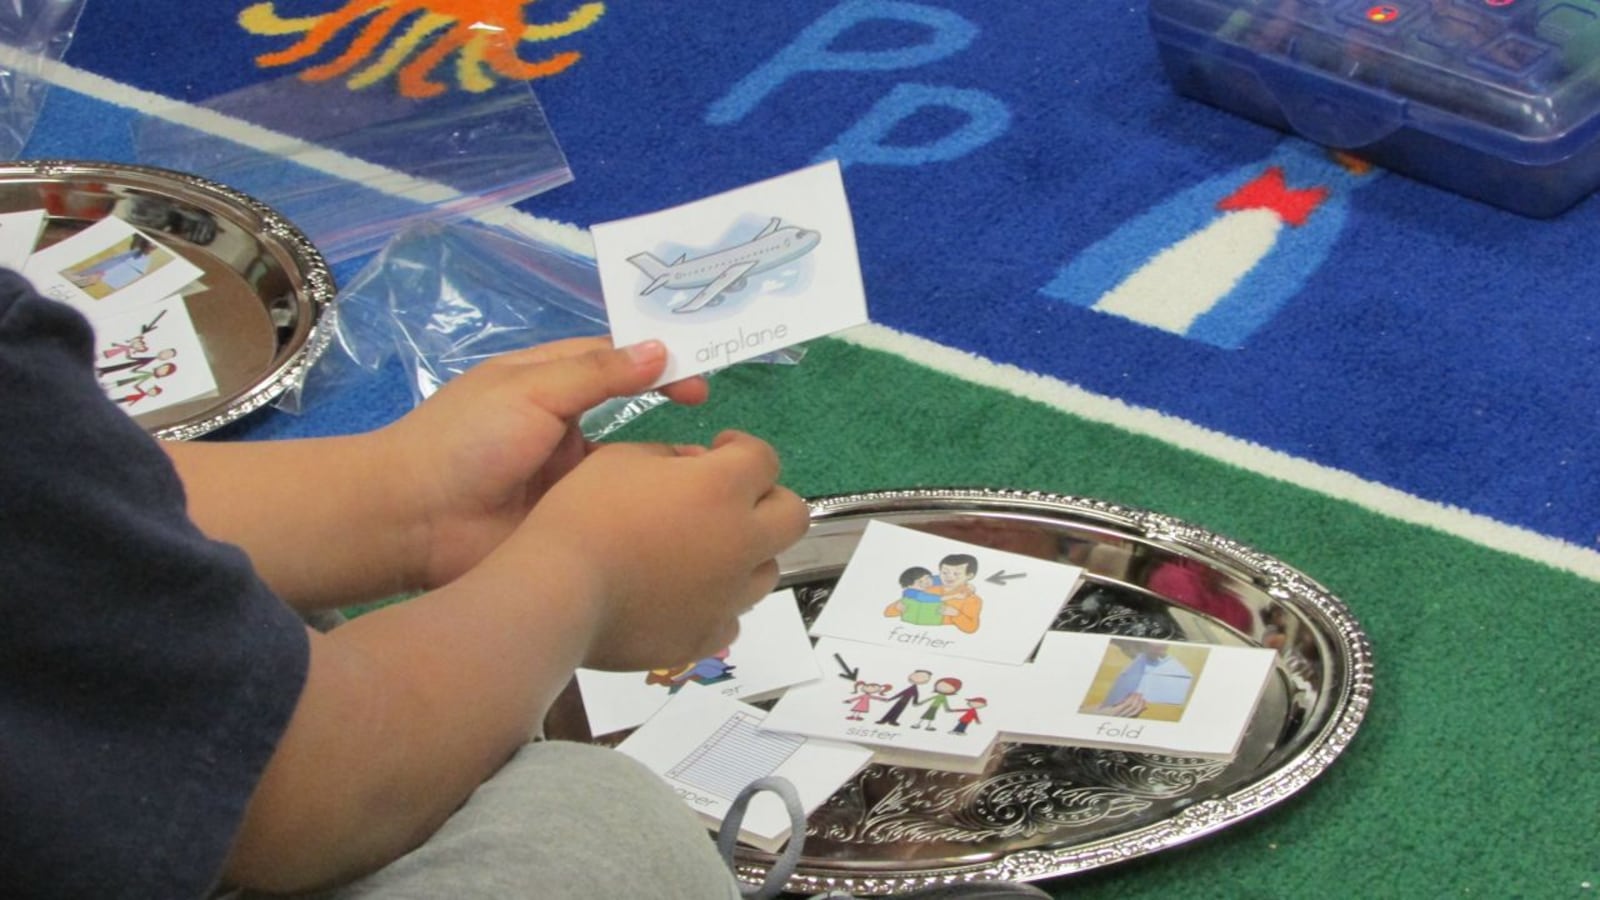 In a first grade class at Nora Elementary School in Washington Township, English language learners use pictures to match to English words.